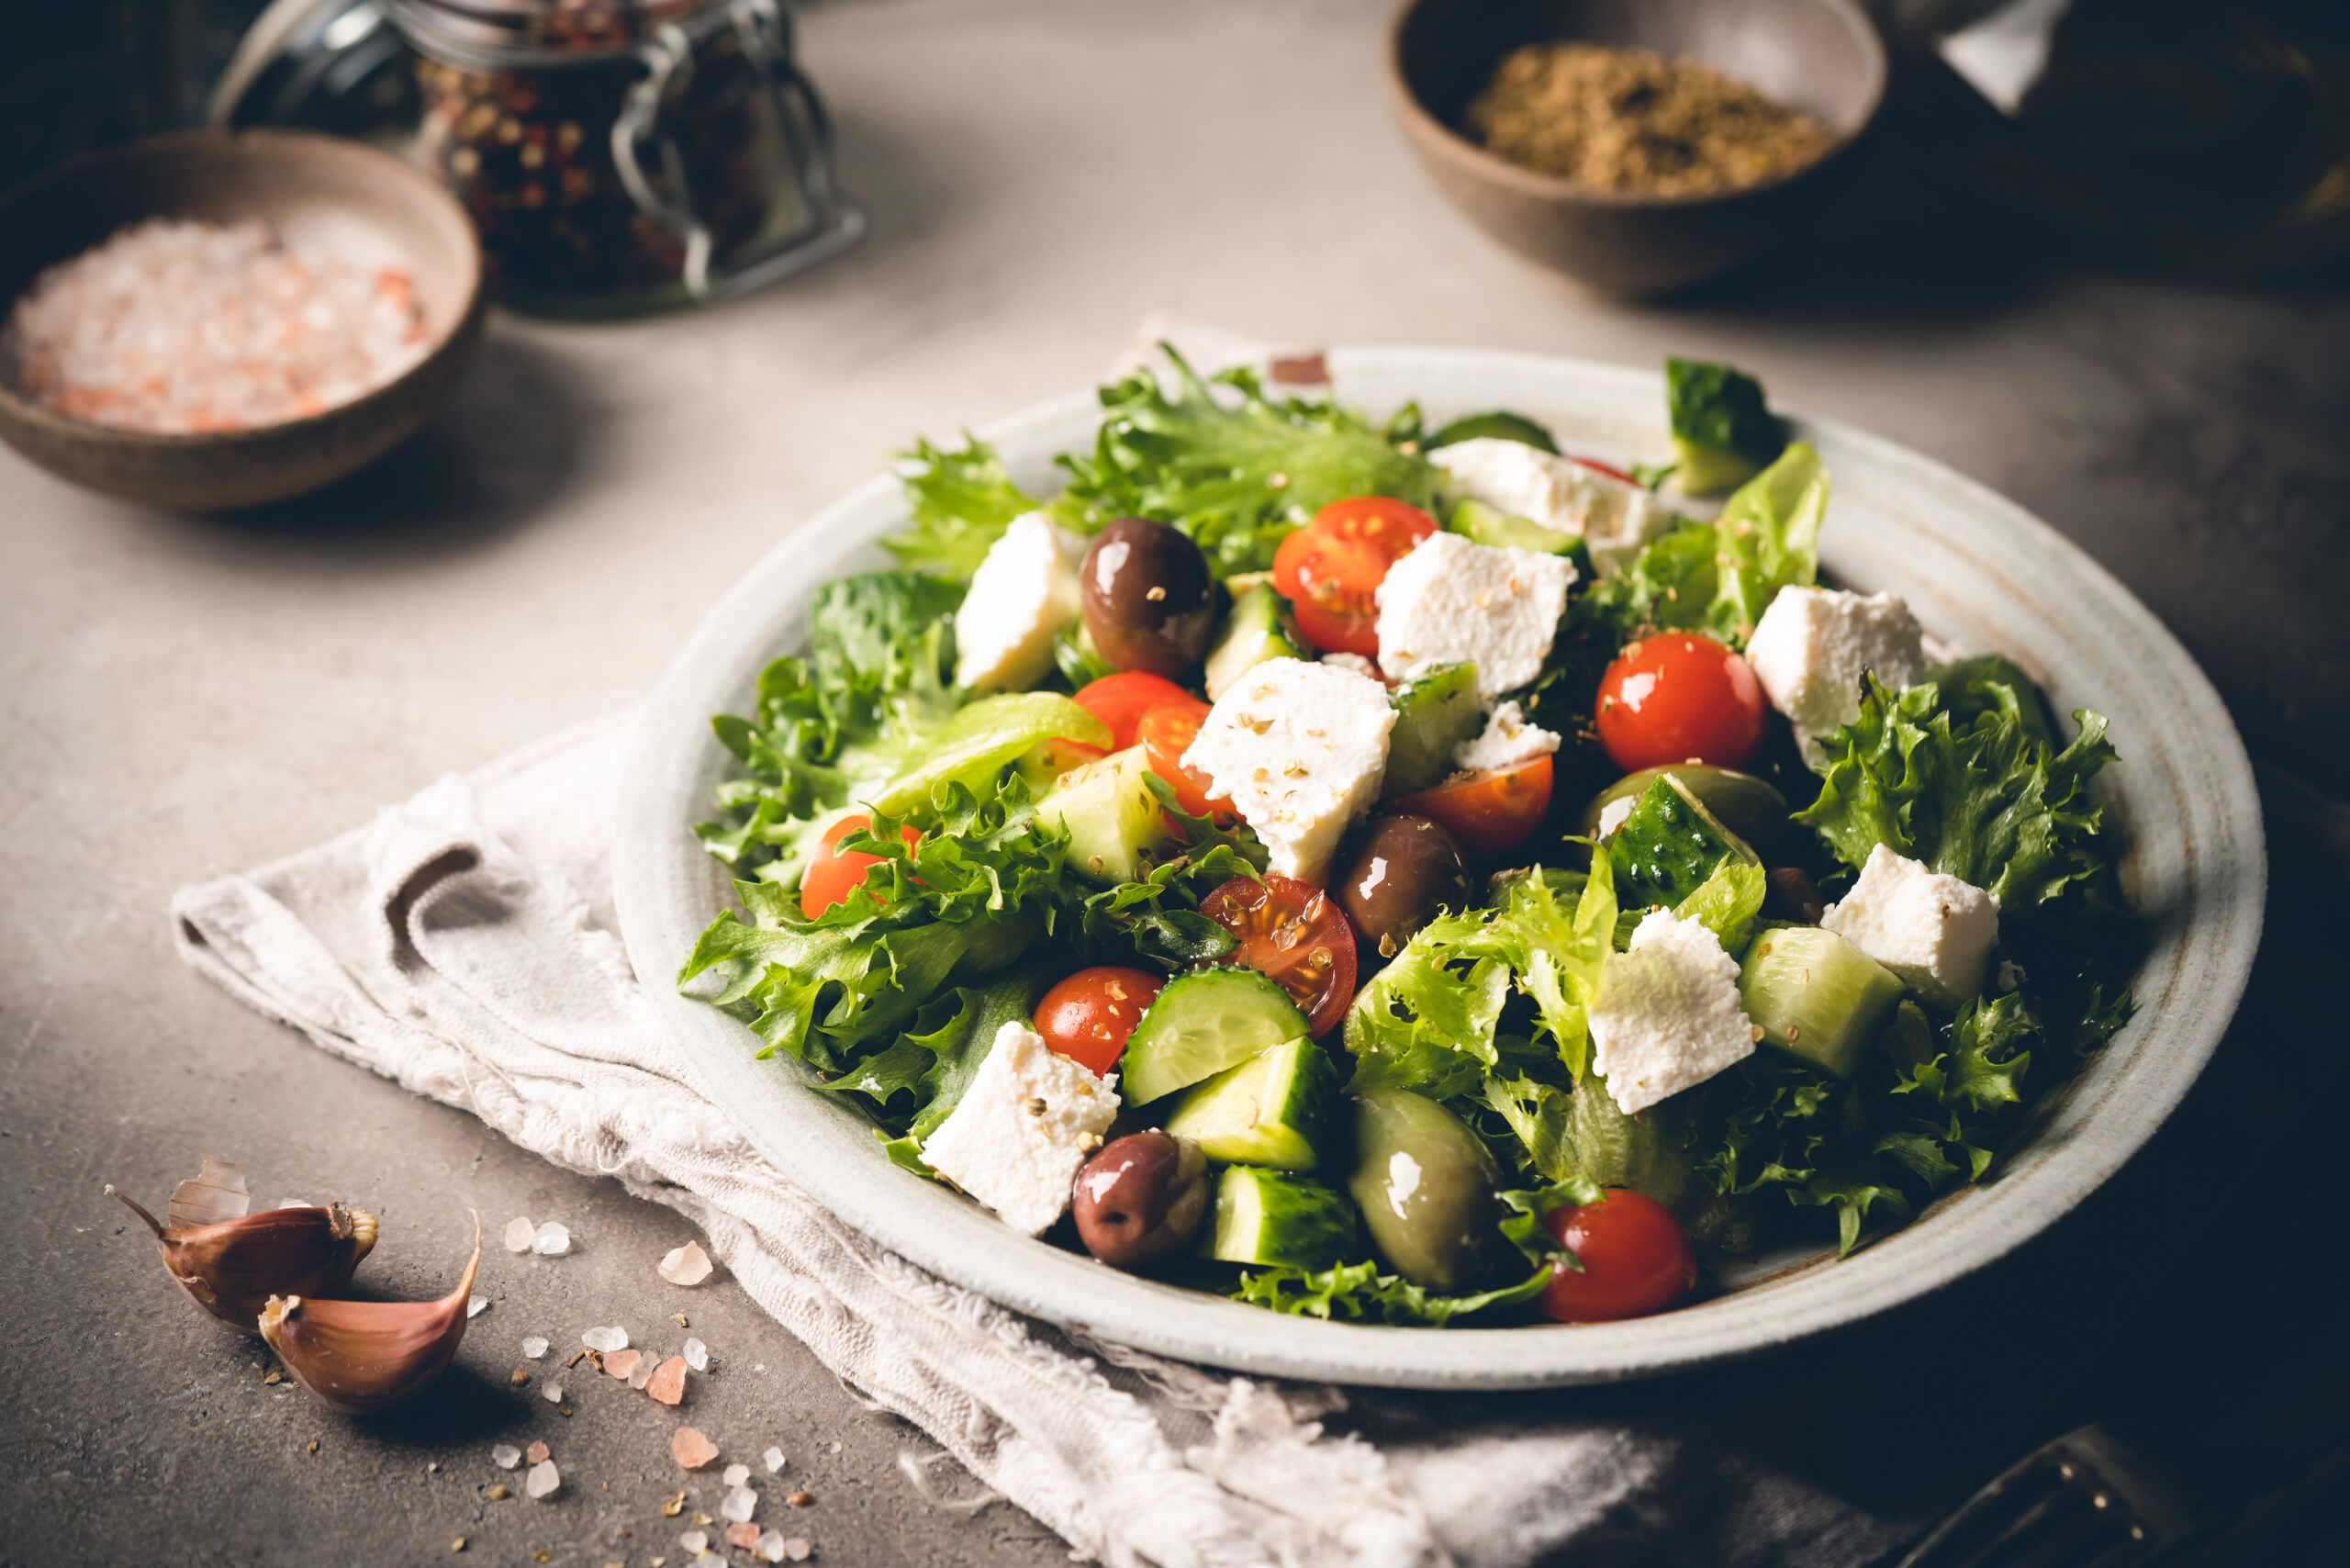 Classic vegetable salad with fresh olives, tomatoes, cucumbers, greek cheese feta and olive oil on gray background.